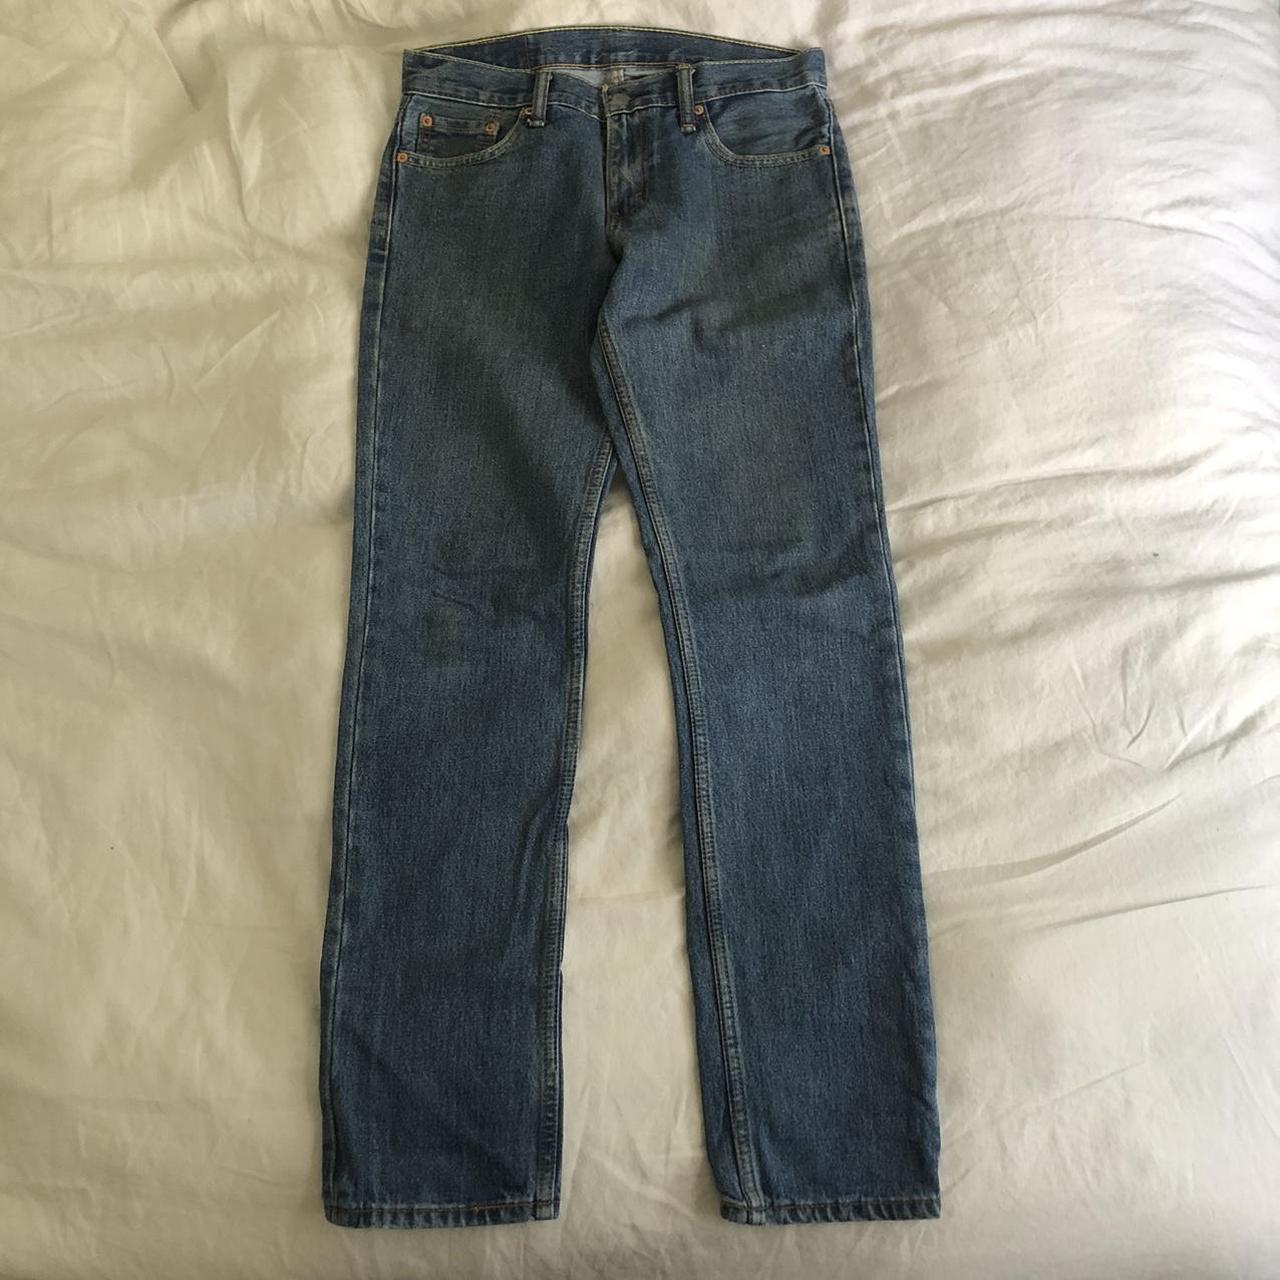 Levi’s 511 slim fit jeans in mid blue. Great classic... - Depop